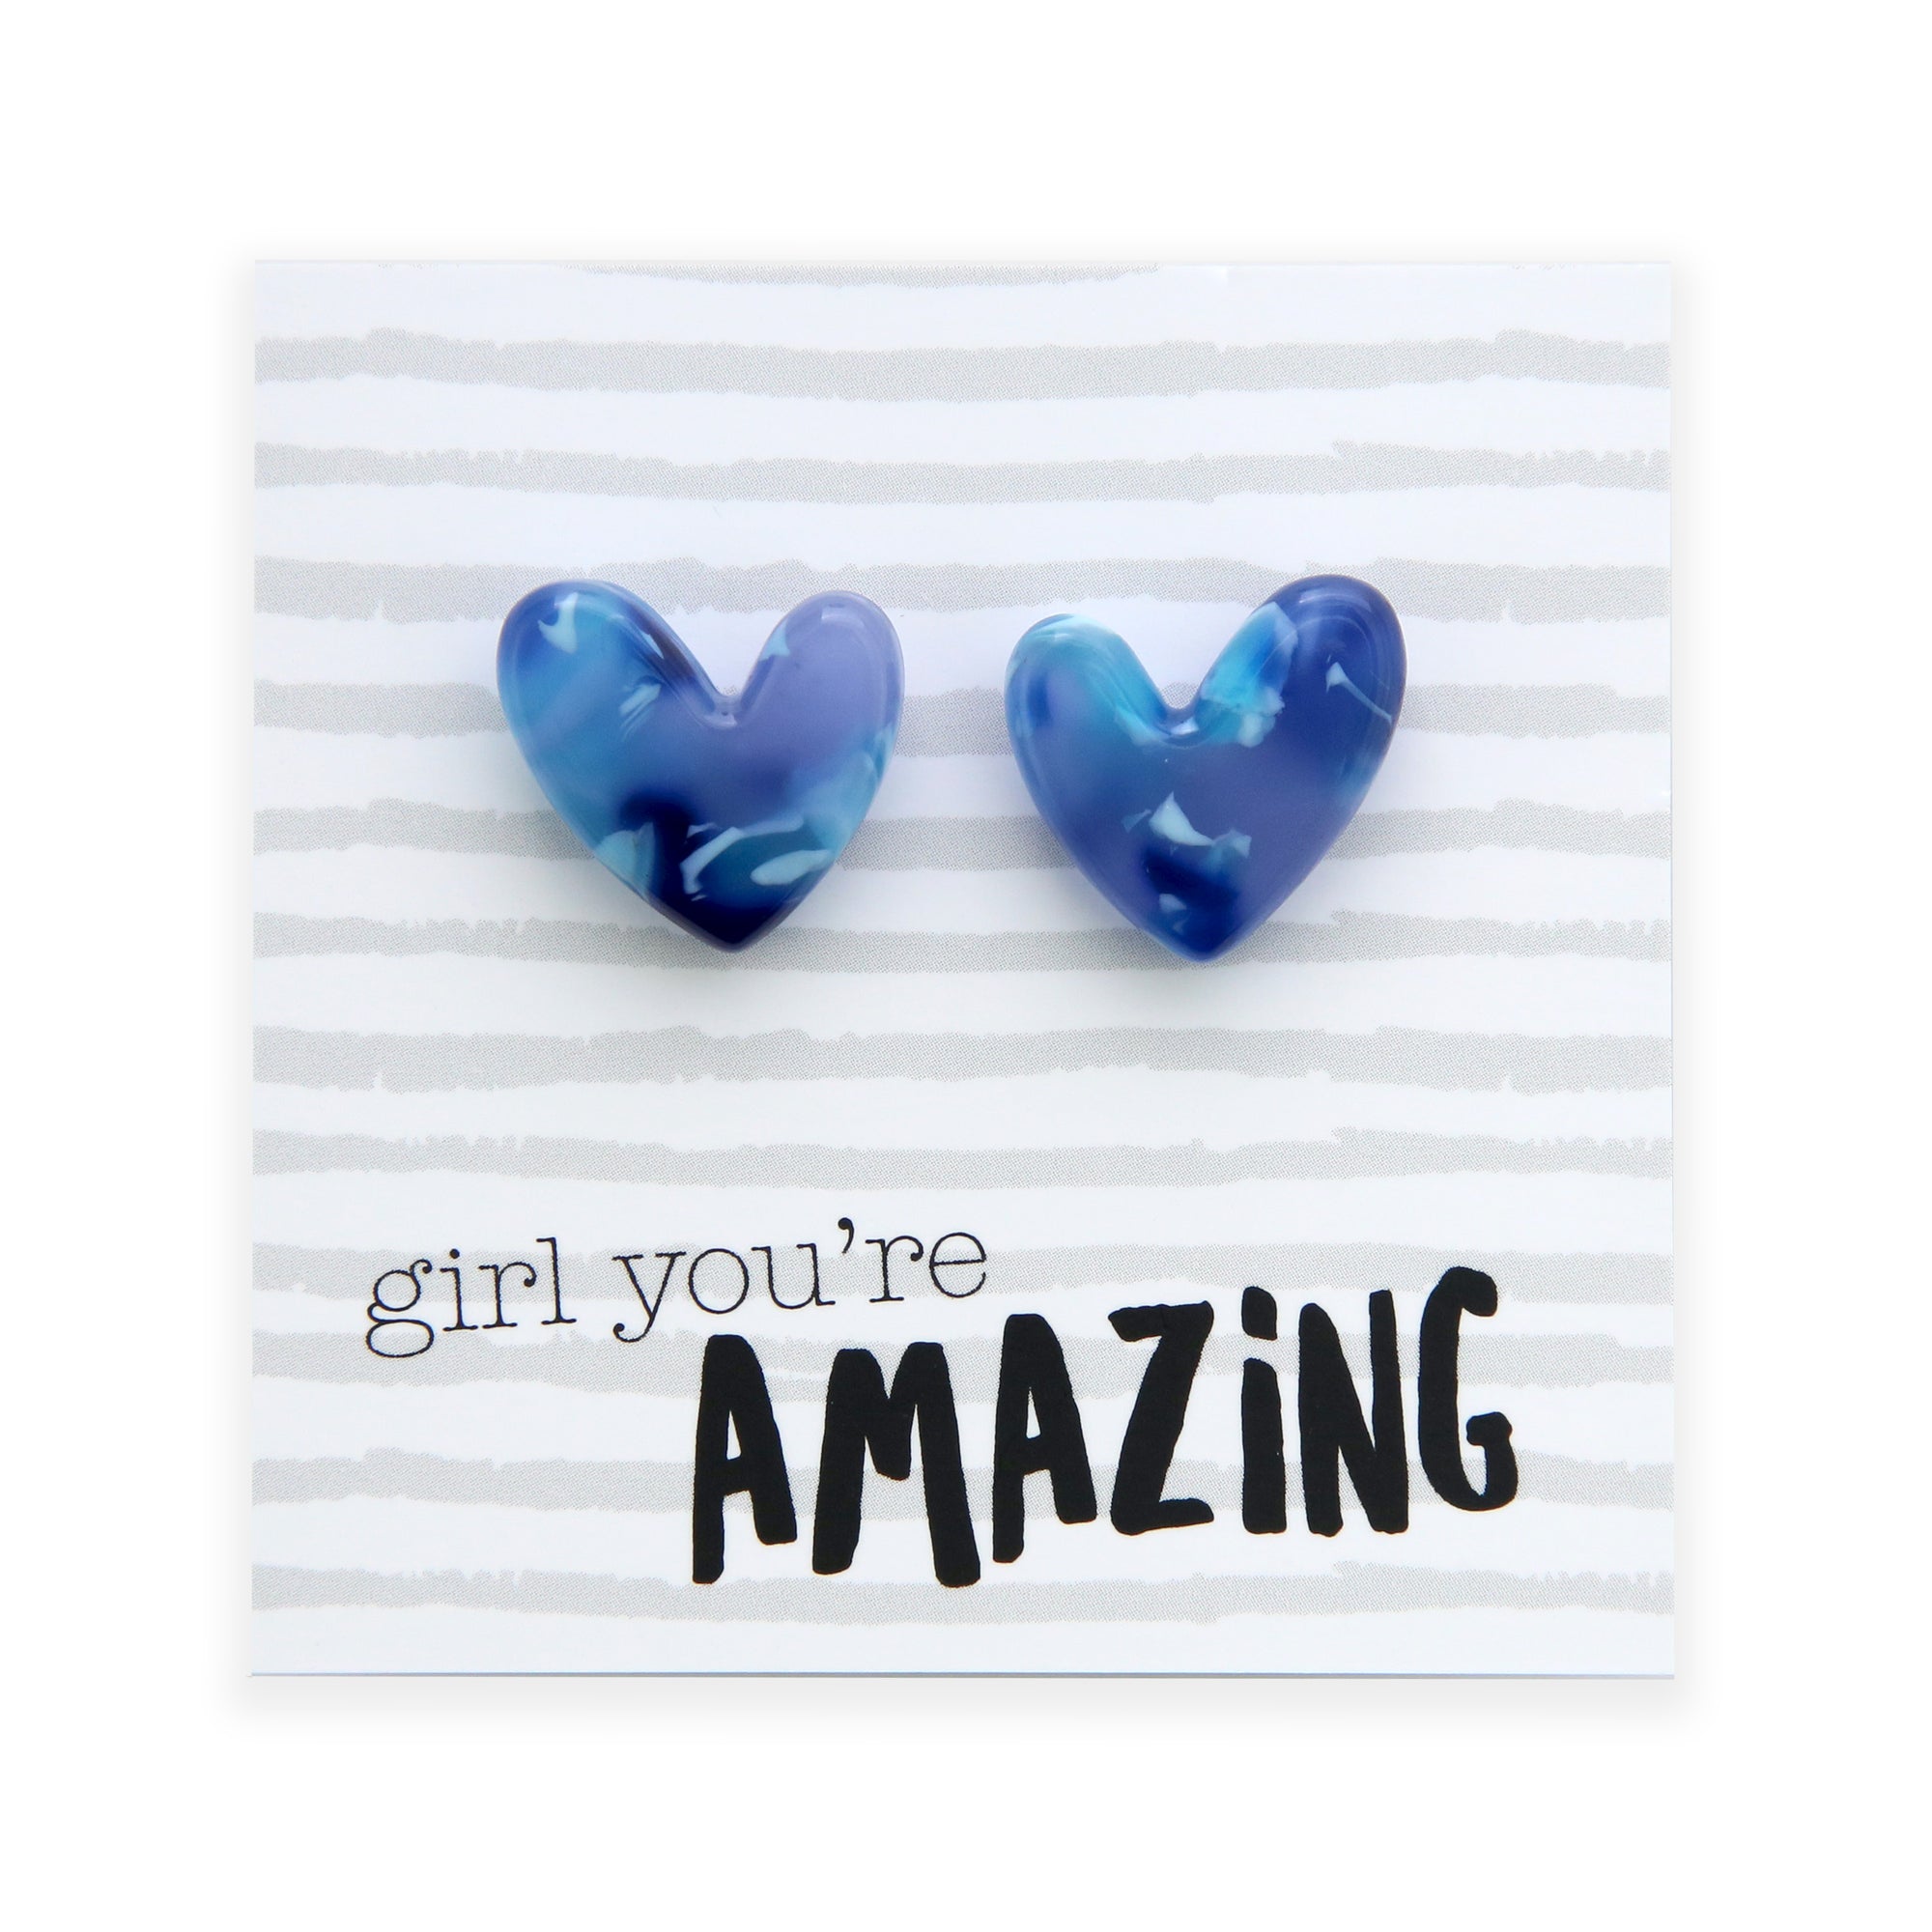 Girl, You're Amazing - Resin Heart Studs - Breezy (12743)